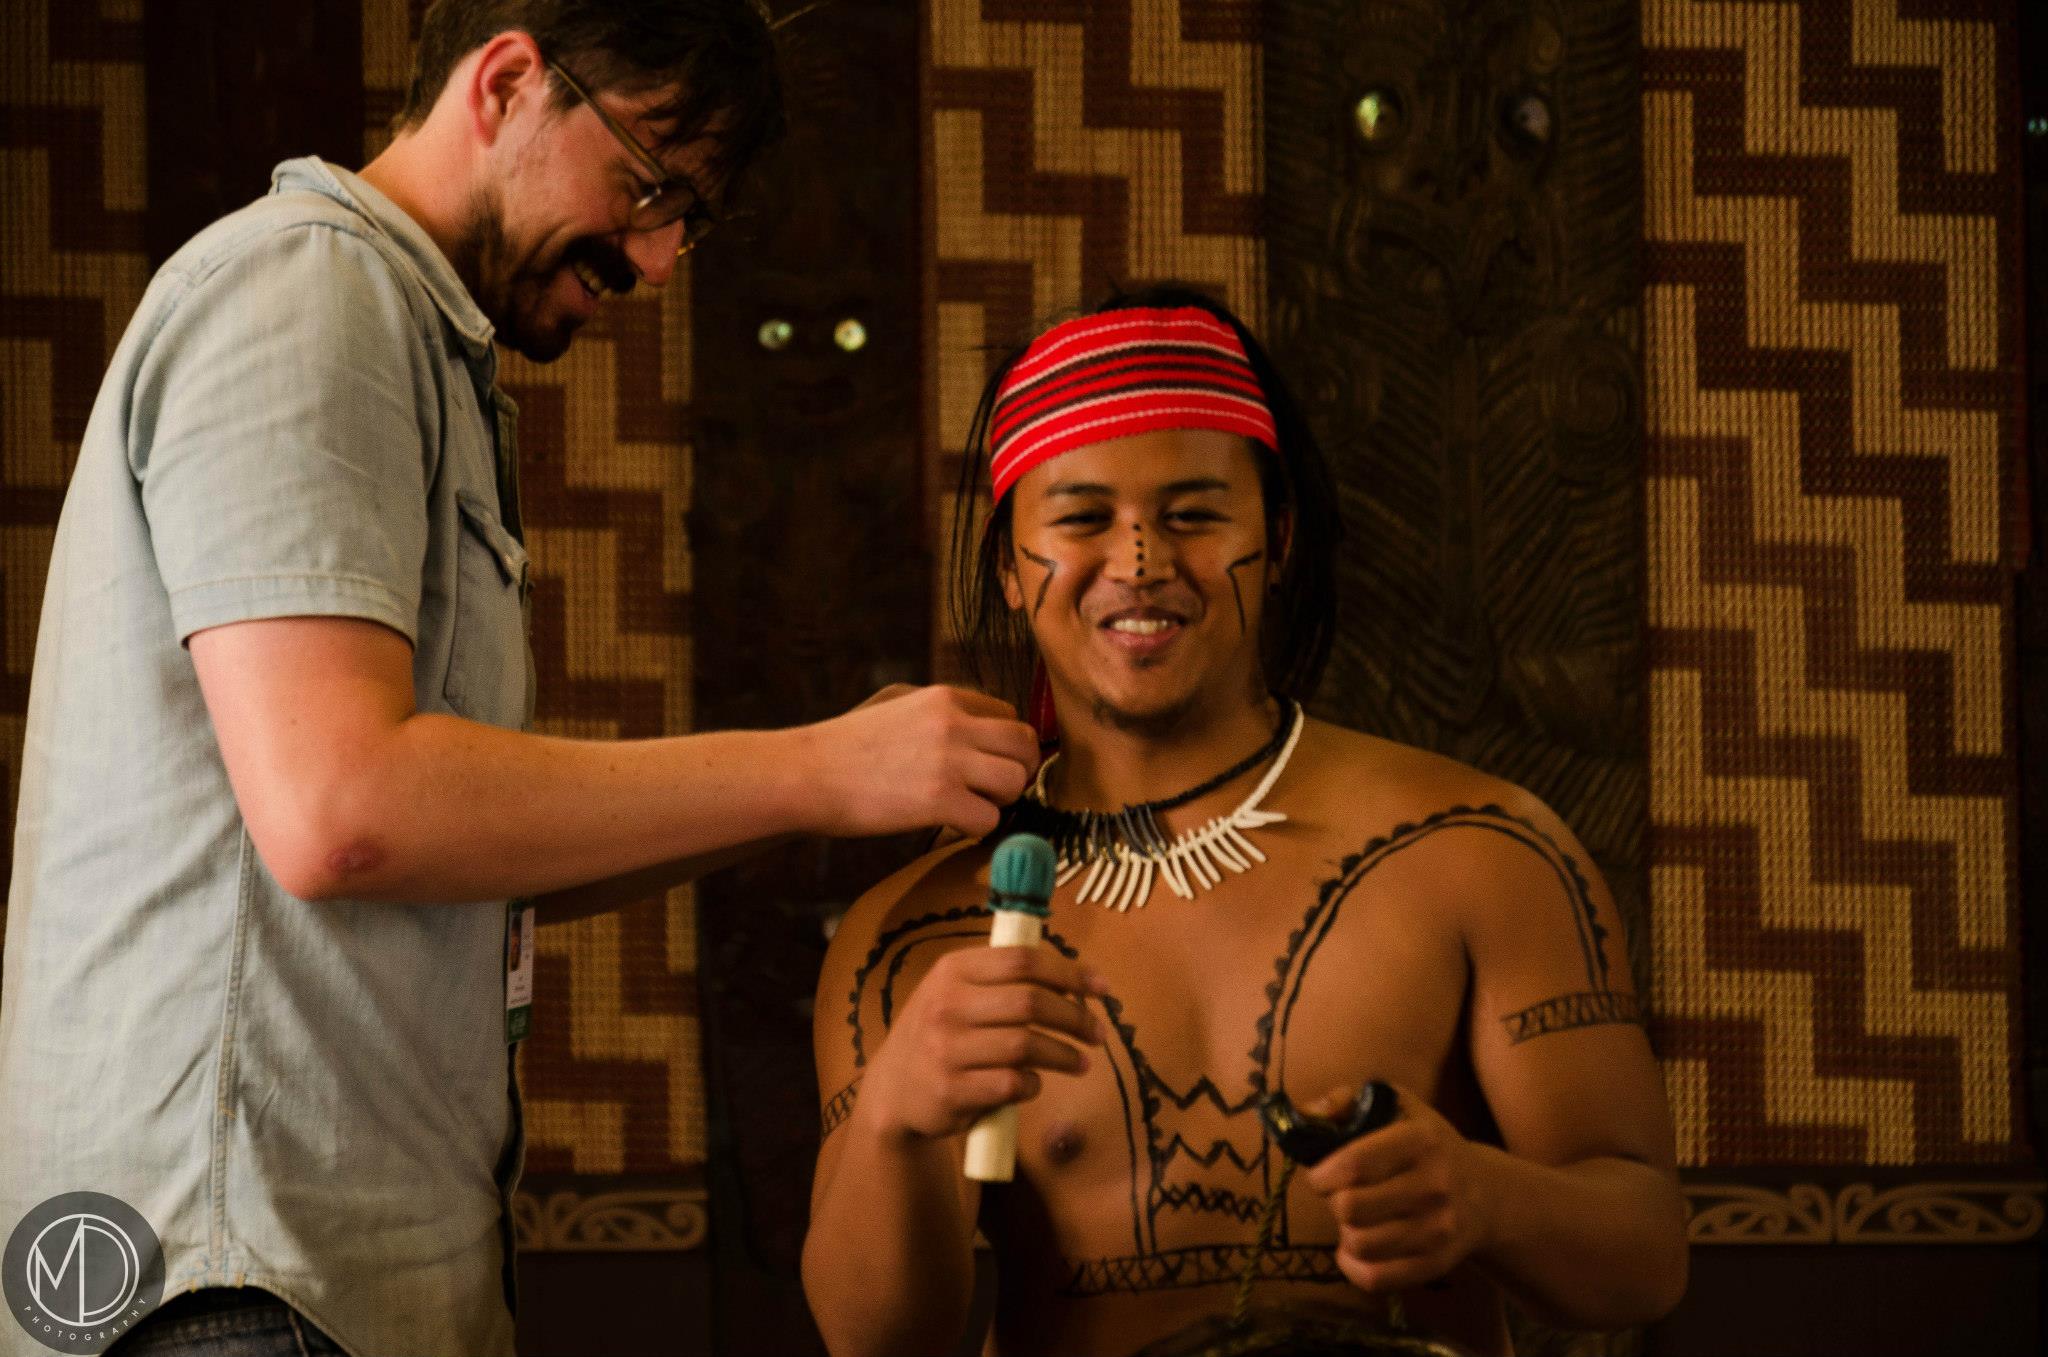 Tom fitting a microphone to Oscar for a video interview. (c) Field Museum of Natural History - CC BY-NC 4.0